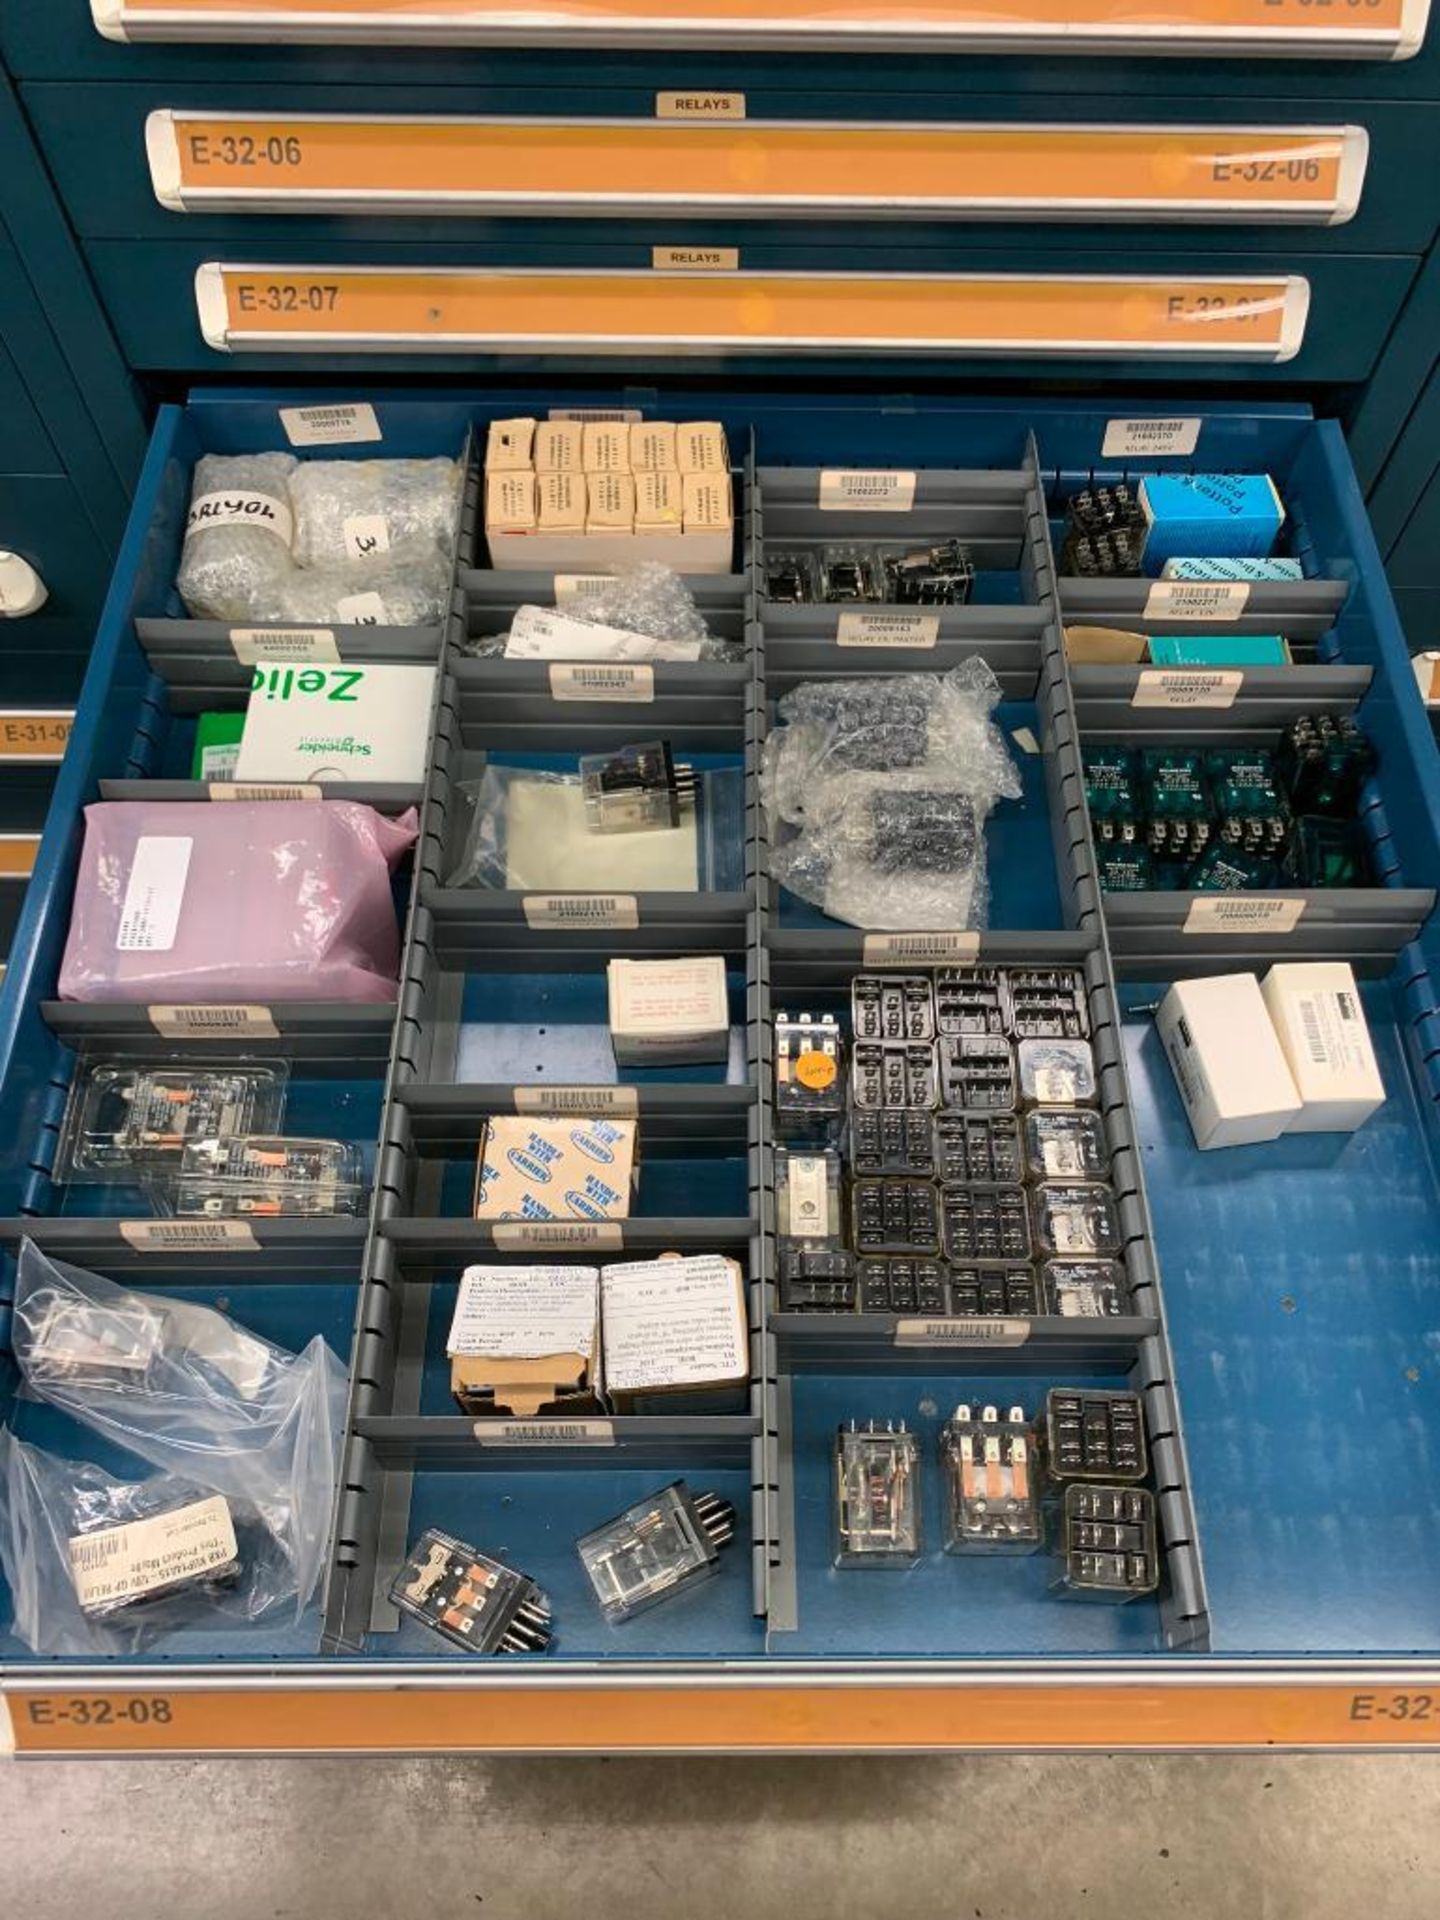 Vidmar 13-Drawer Cabinet w/ Assorted Relays, Contact Blocks - Image 9 of 16